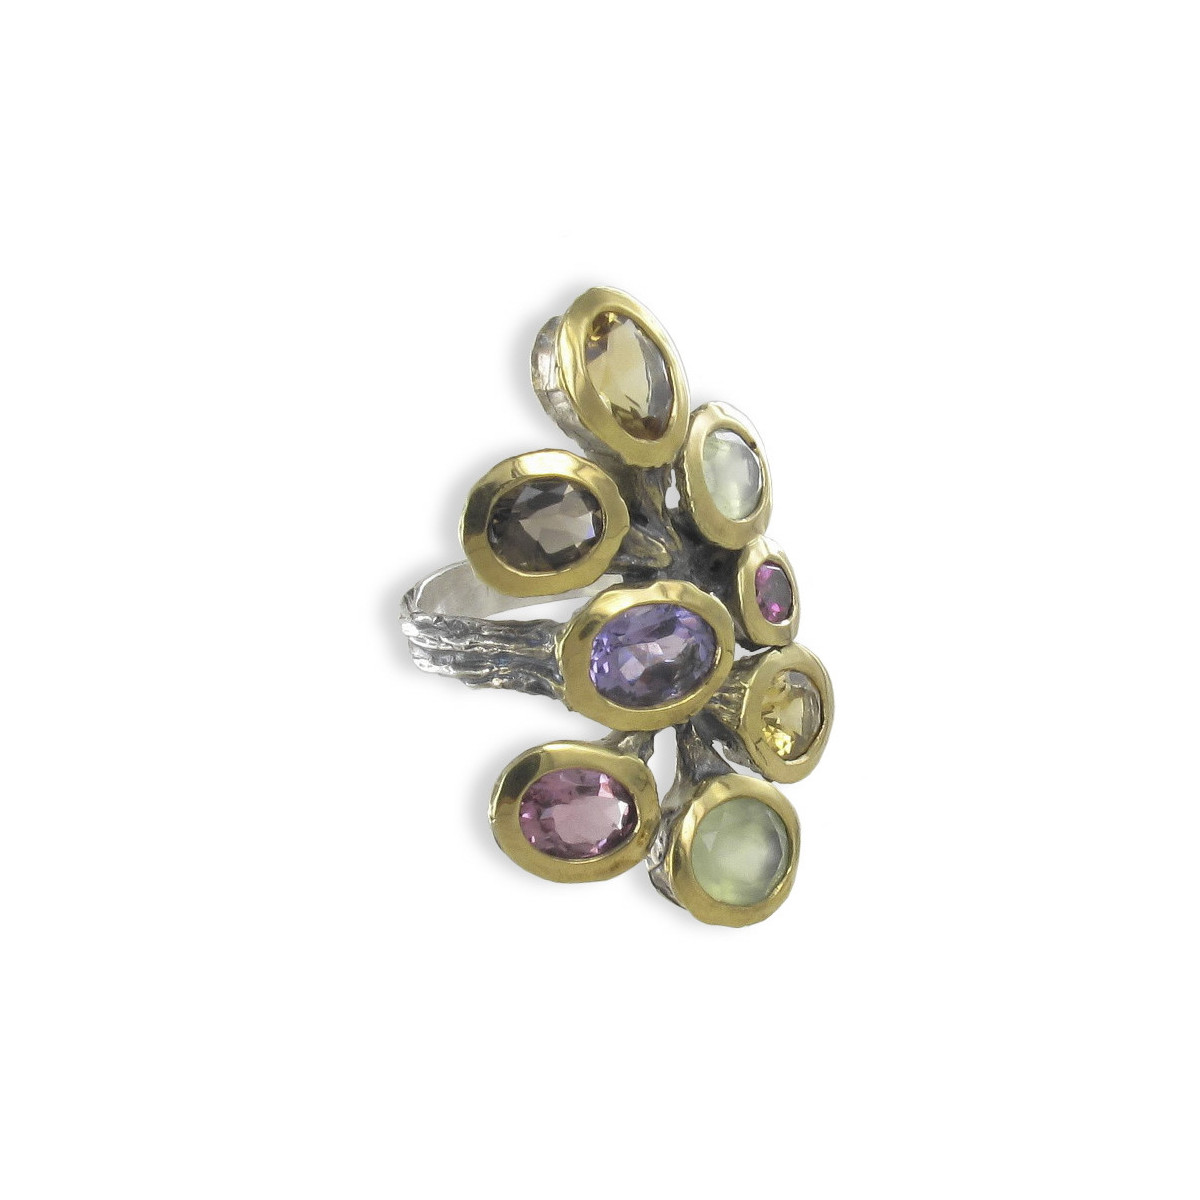 WIDE SILVER AND GOLD RING WITH 8 STONES